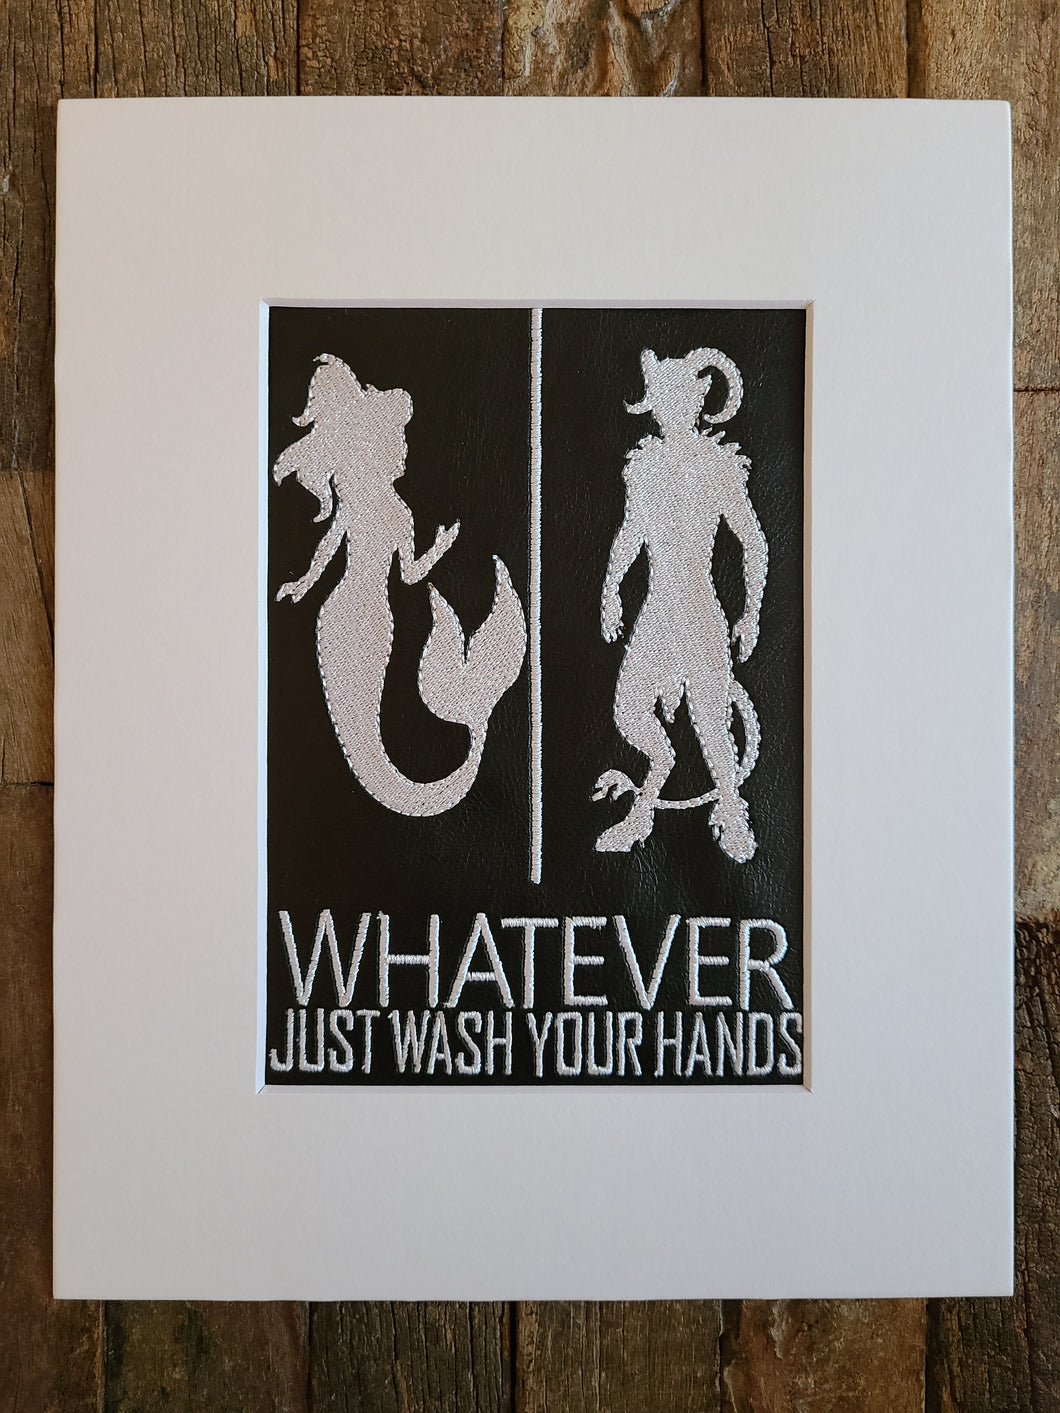 Embroidered Wall Hanging - Geeky Embroidery - Whatever, Just Wash Your Hands - Mermaid And Satyr - Black And White - Bathroom Decor